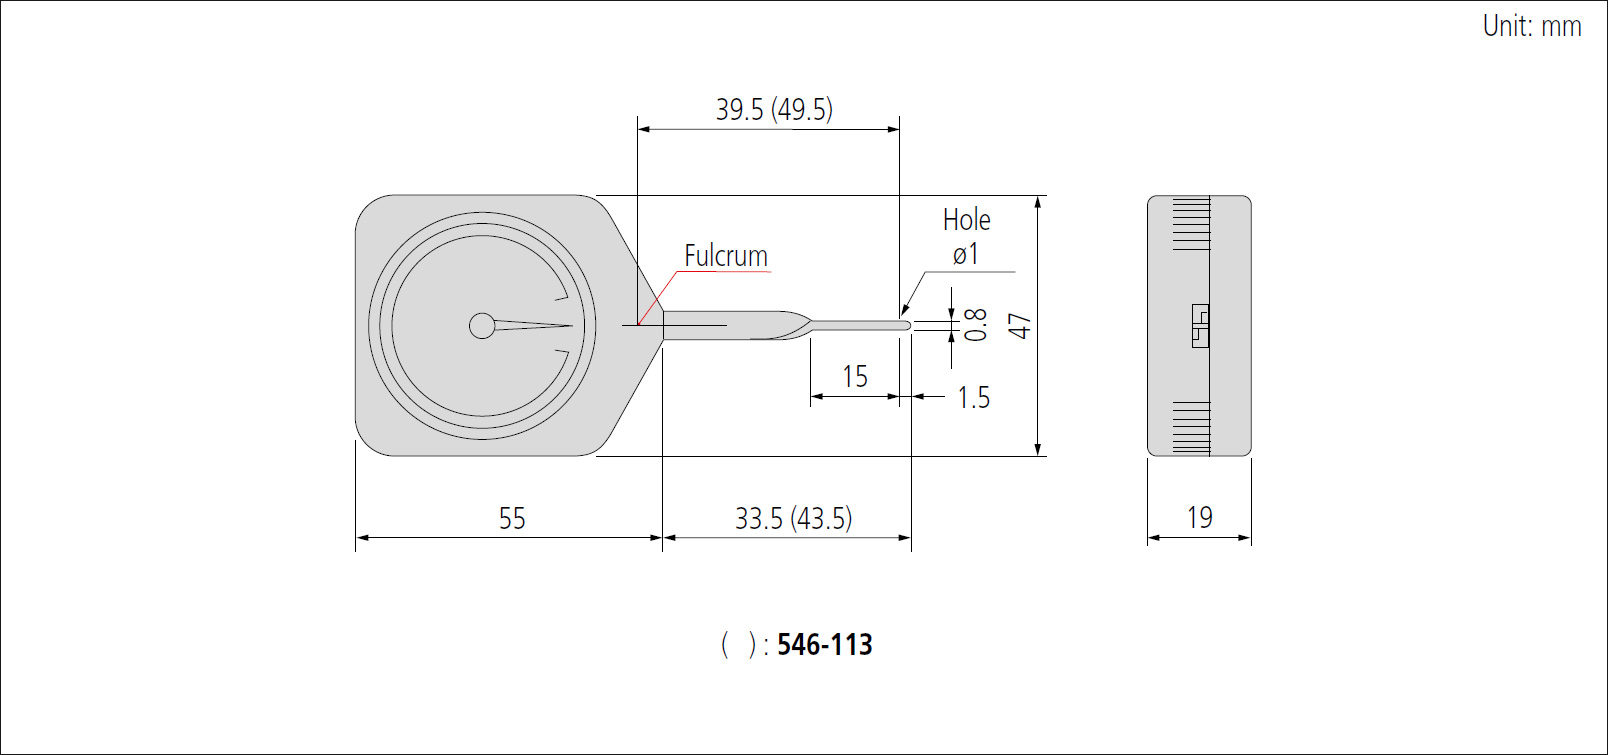 Mitutoyo contact force gauge dimensions.